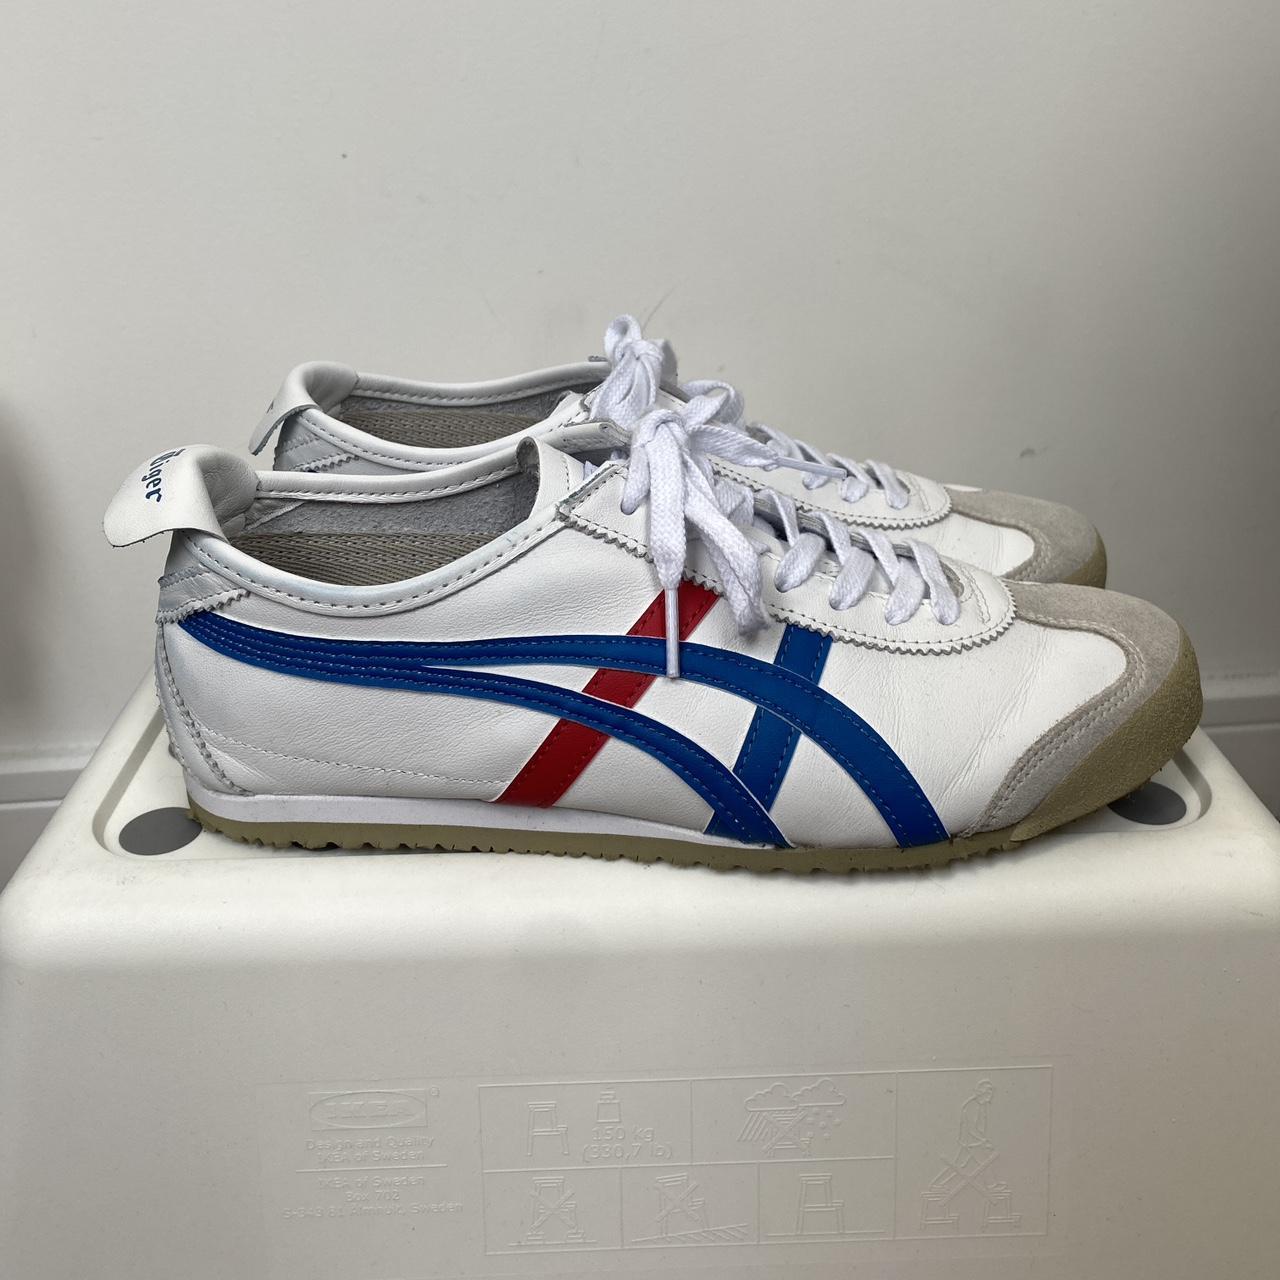 Onitsuka Tiger Mexico 66’s in White, Blue, and Red... - Depop